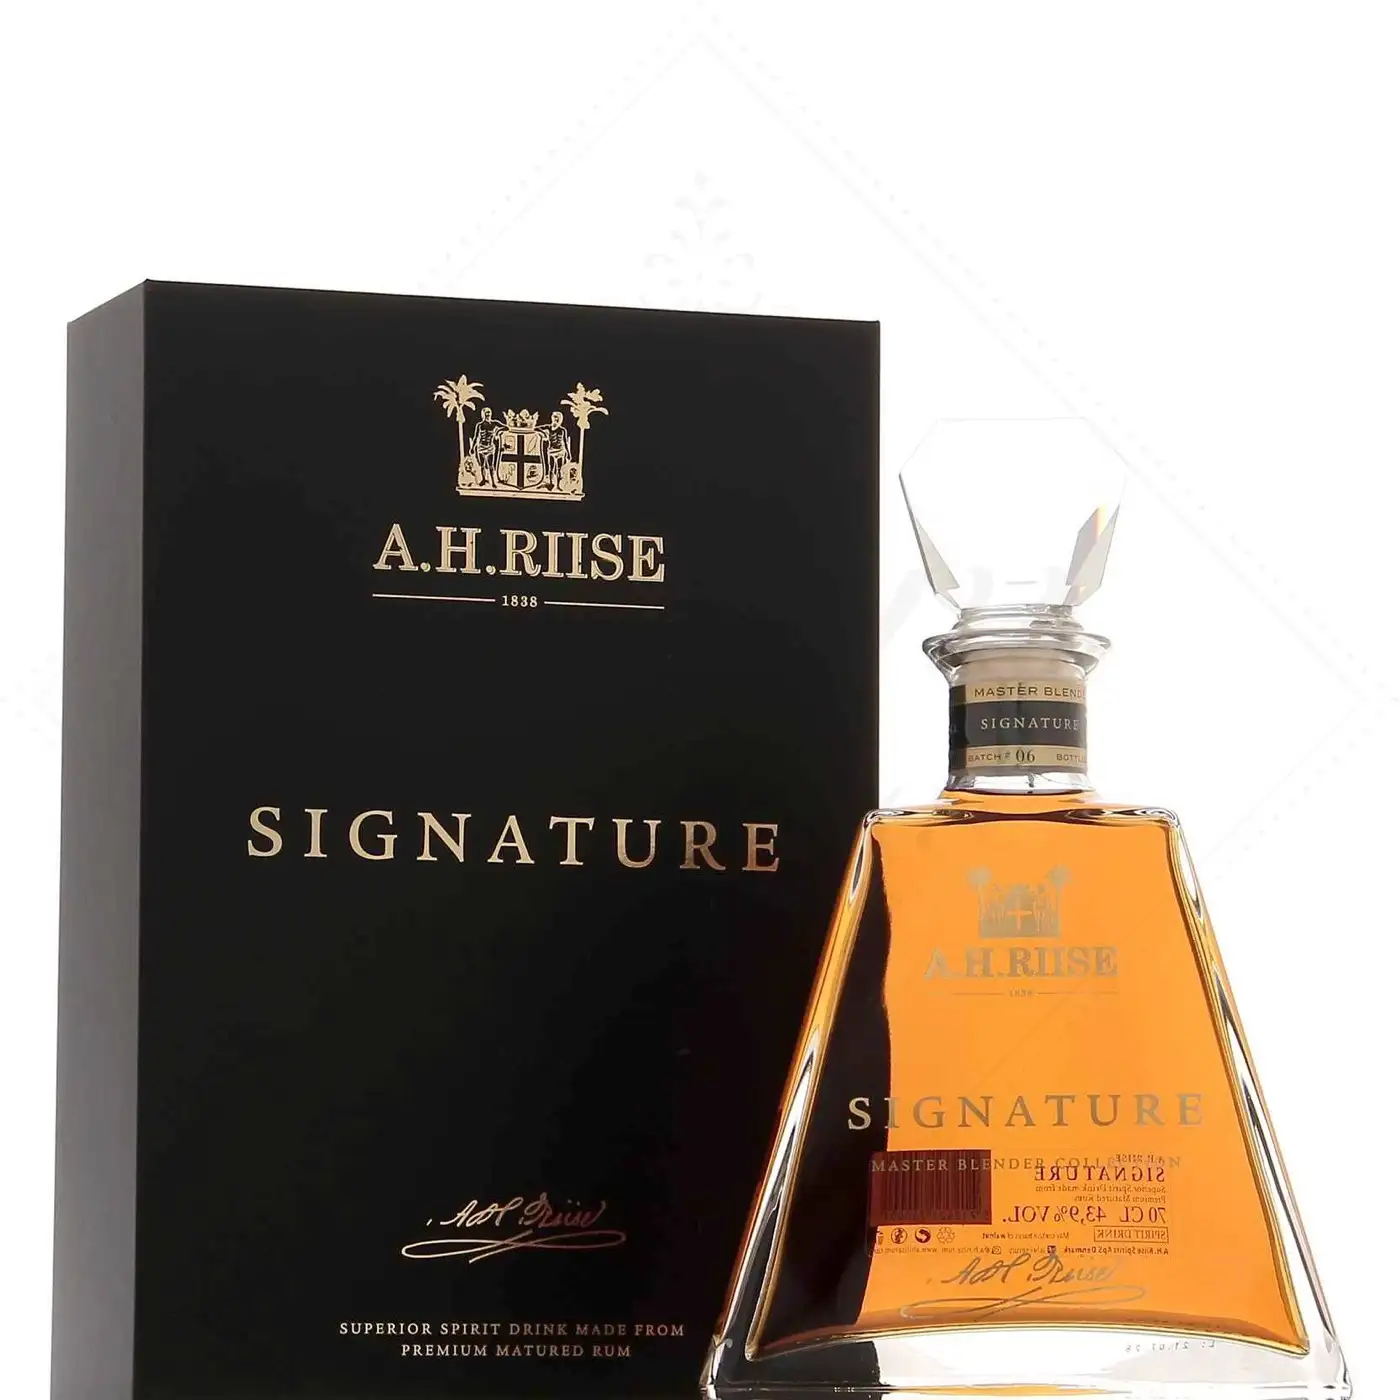 Image of the front of the bottle of the rum Signature